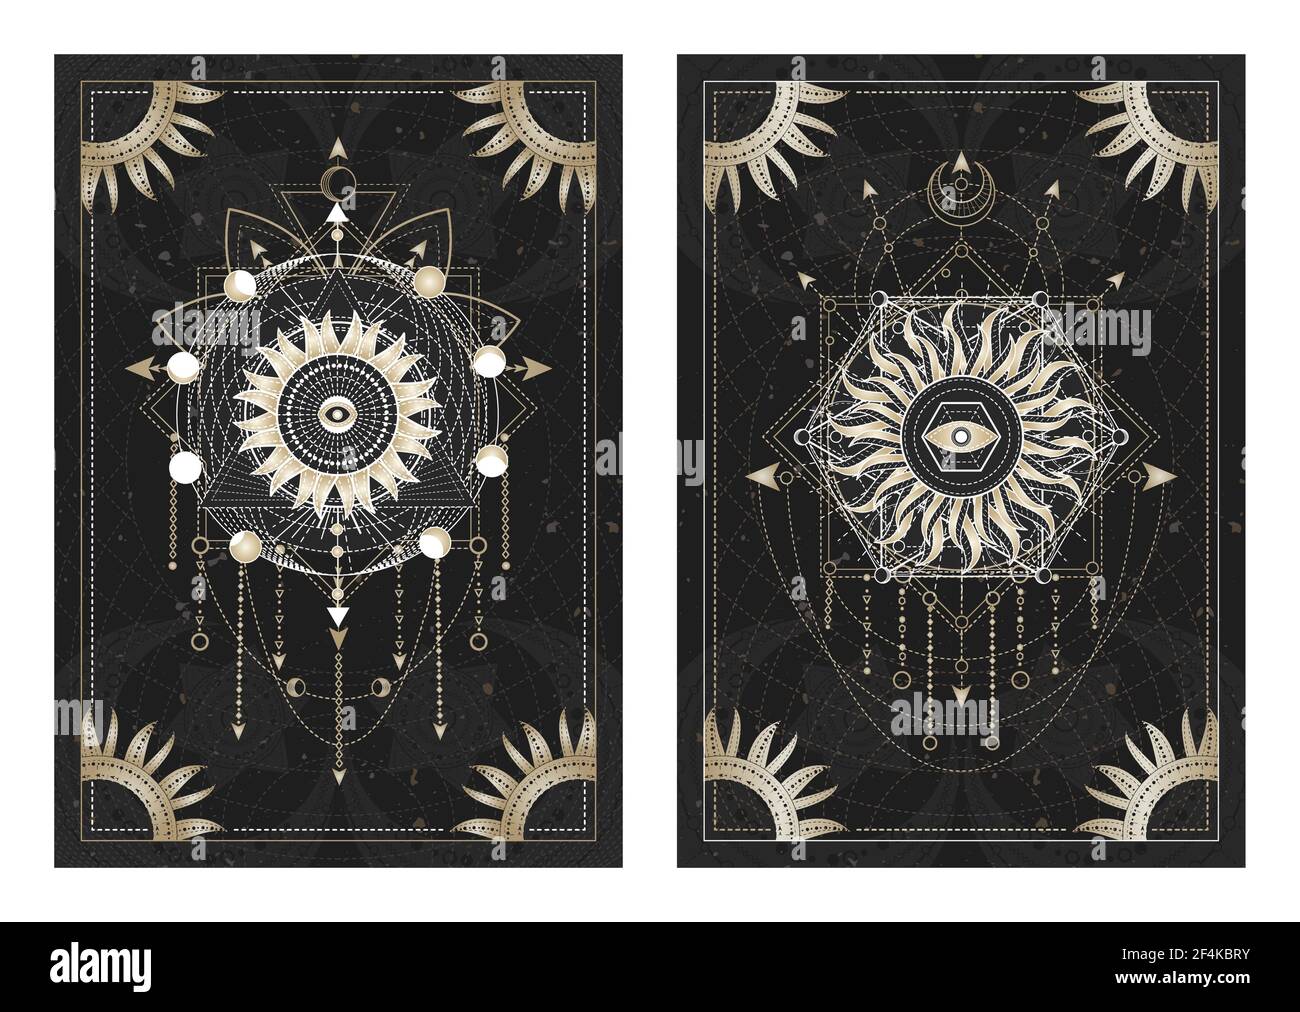 Vector dark illustrations with sacred geometry symbols, grunge textures and frames. Images in black, white and gold., Vector dark illustrations with s Stock Vector